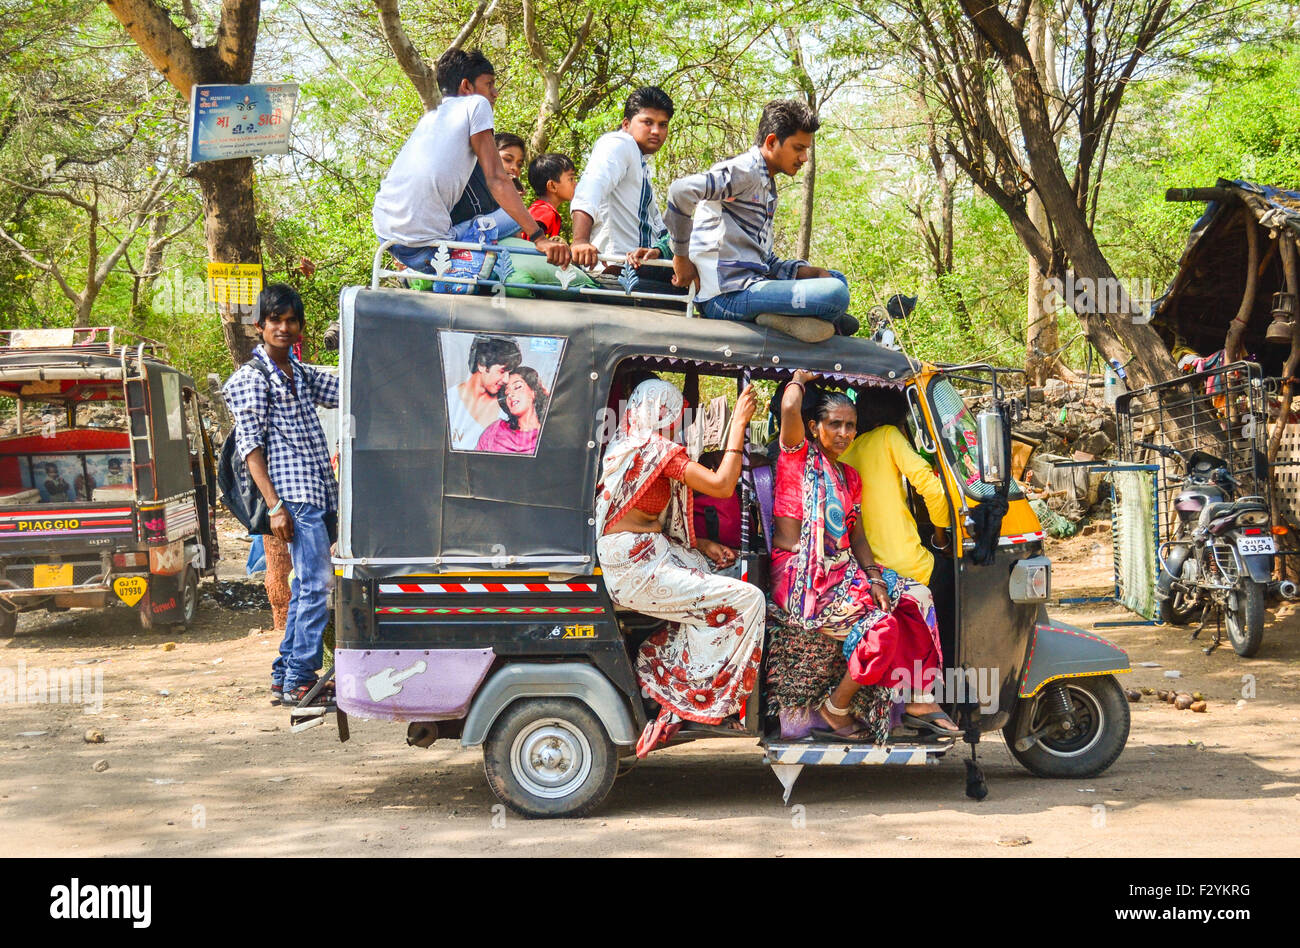 an-auto-rickshaw-overloaded-with-people-posing-a-threat-to-passengers-f2ykrg.jpg